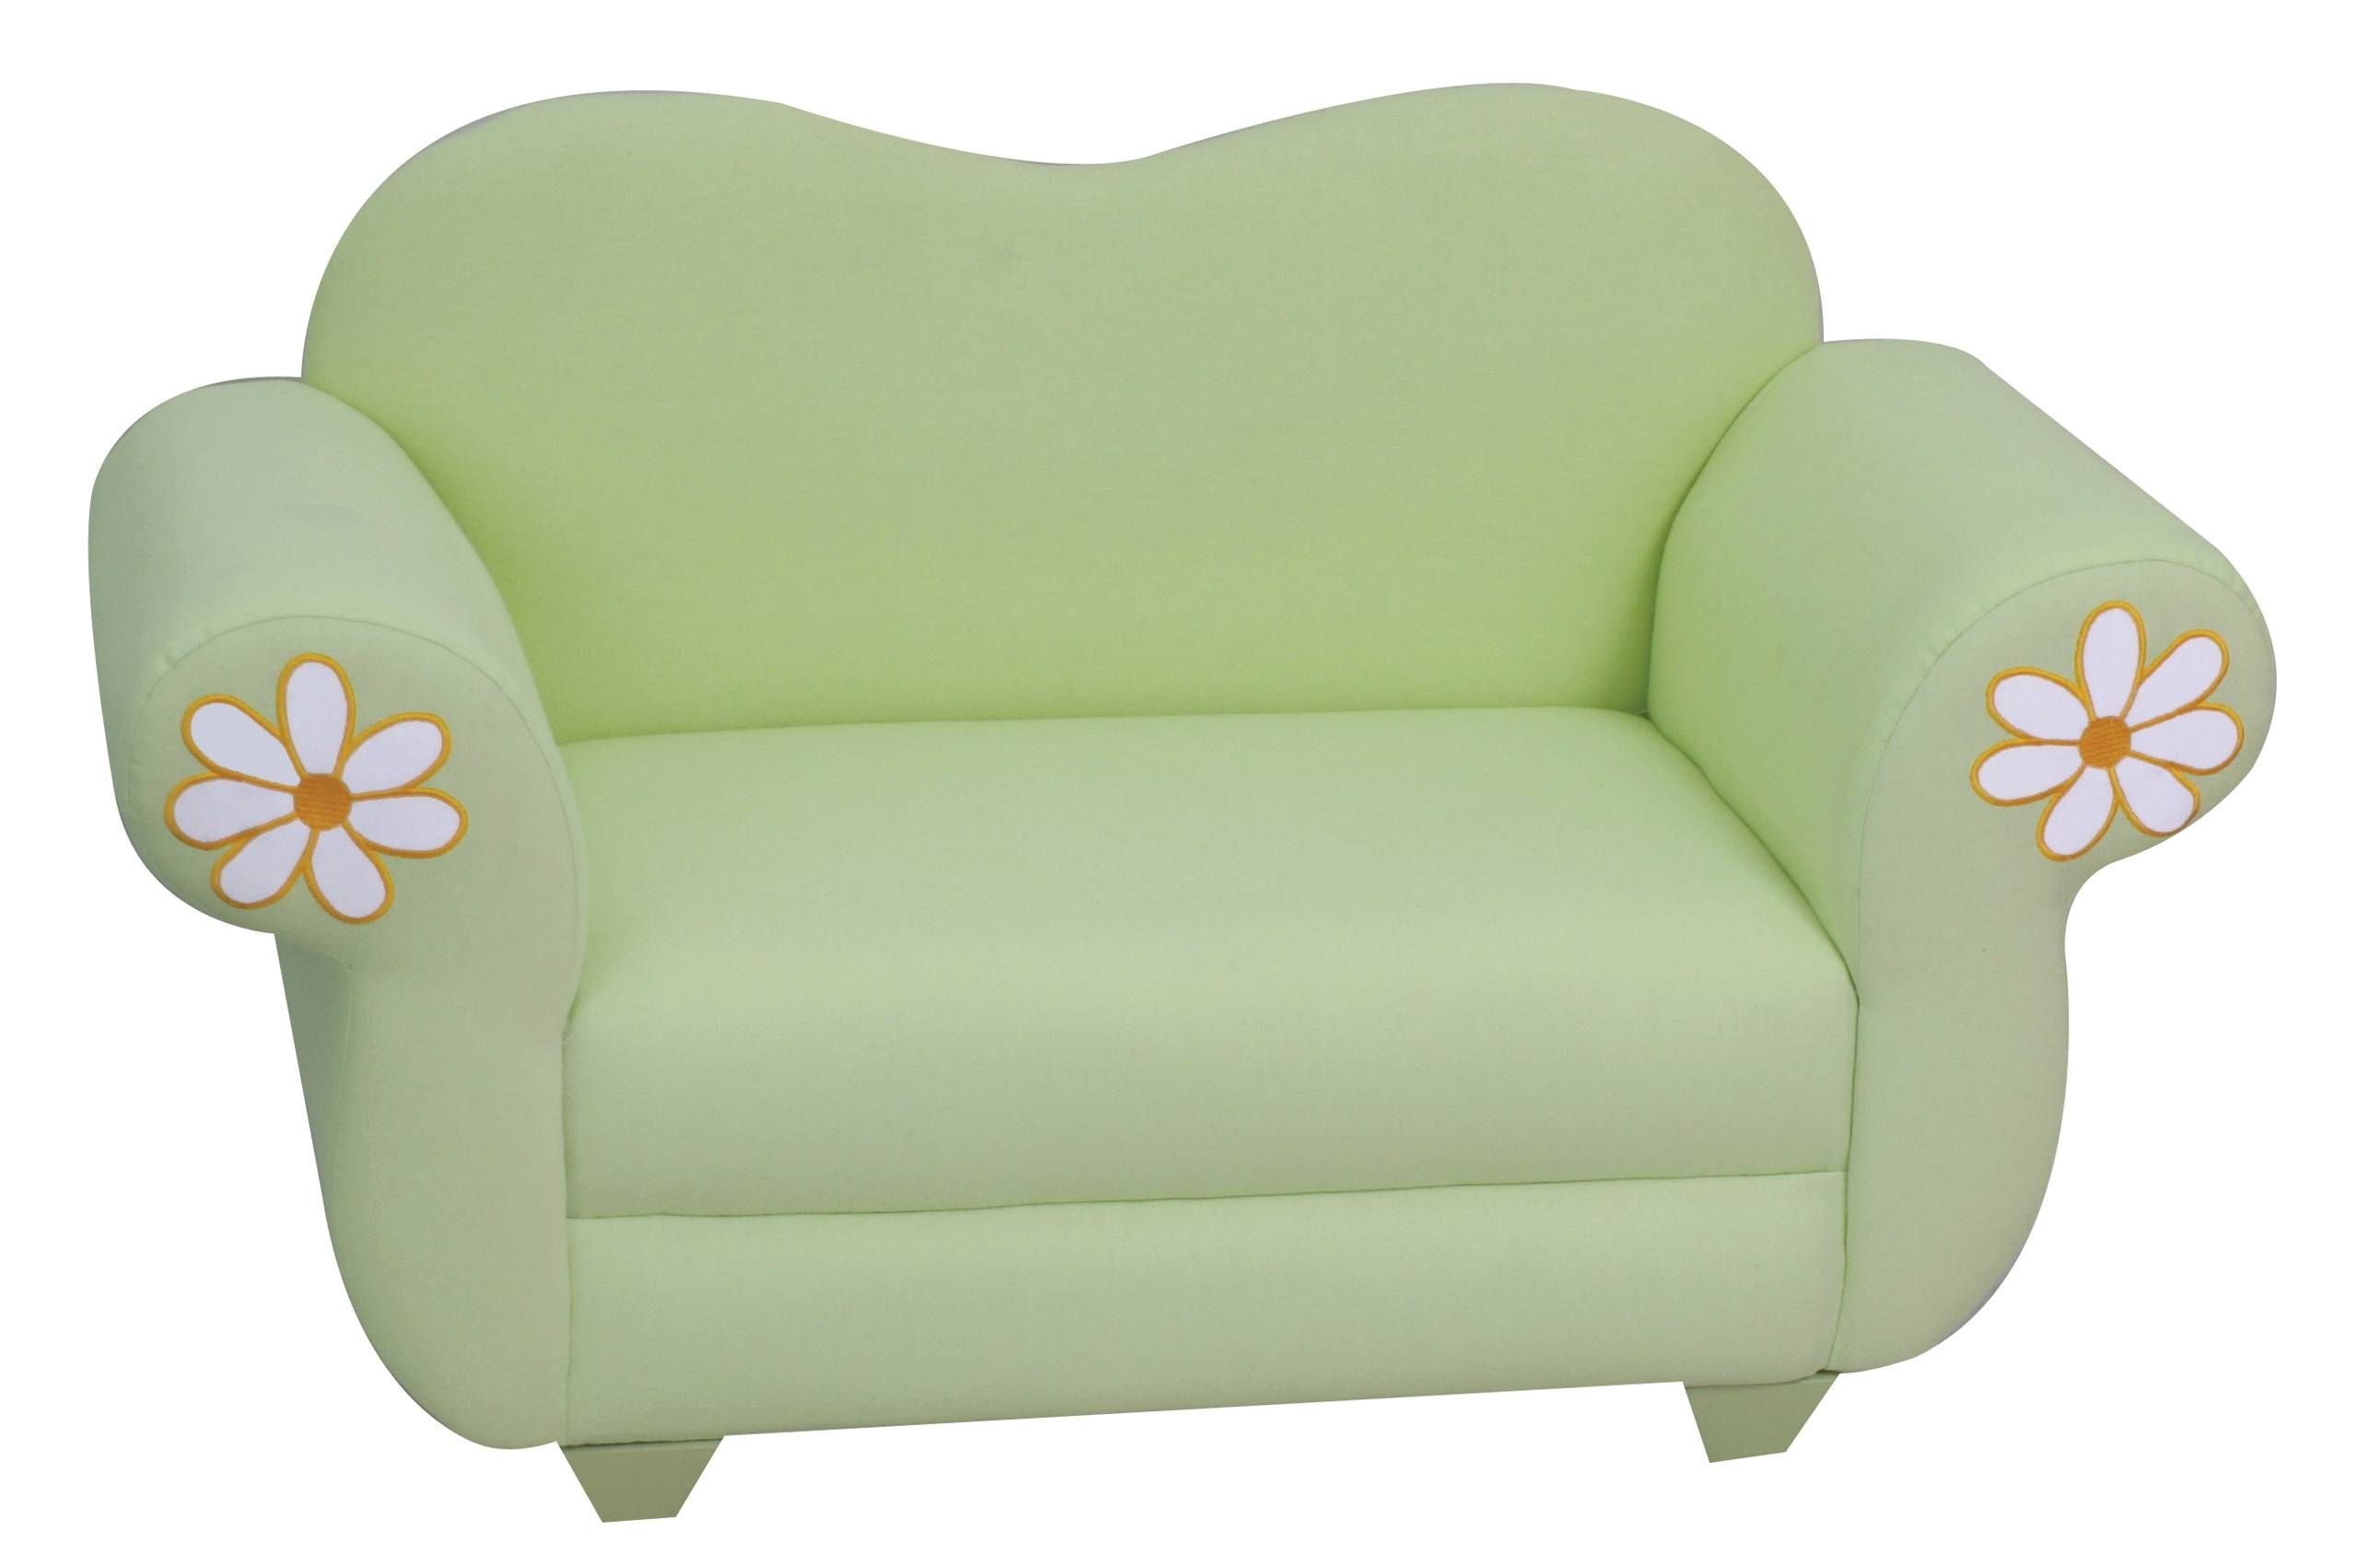 Homely Design Sofa Chairs Fantastic Sofas And Chairs 1496 Intended For Sofa With Chairs (Photo 6 of 15)